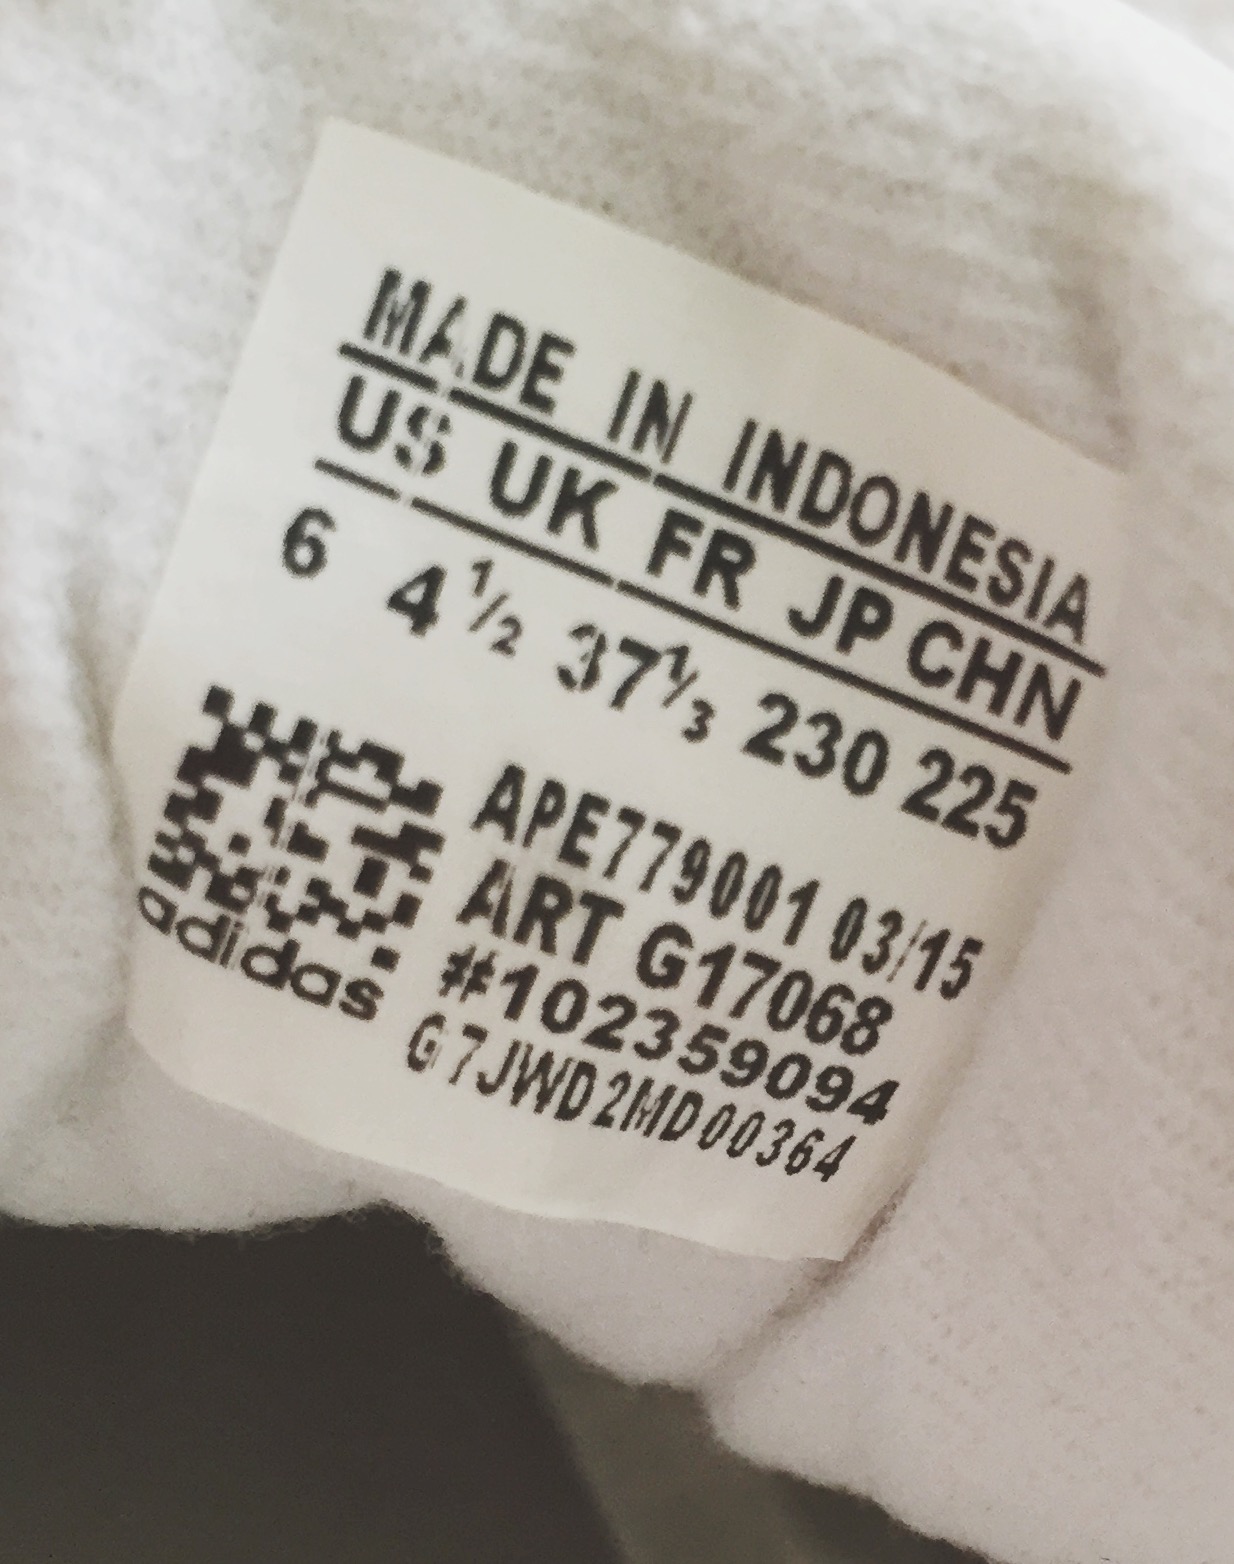 adidas shoes serial number lookup